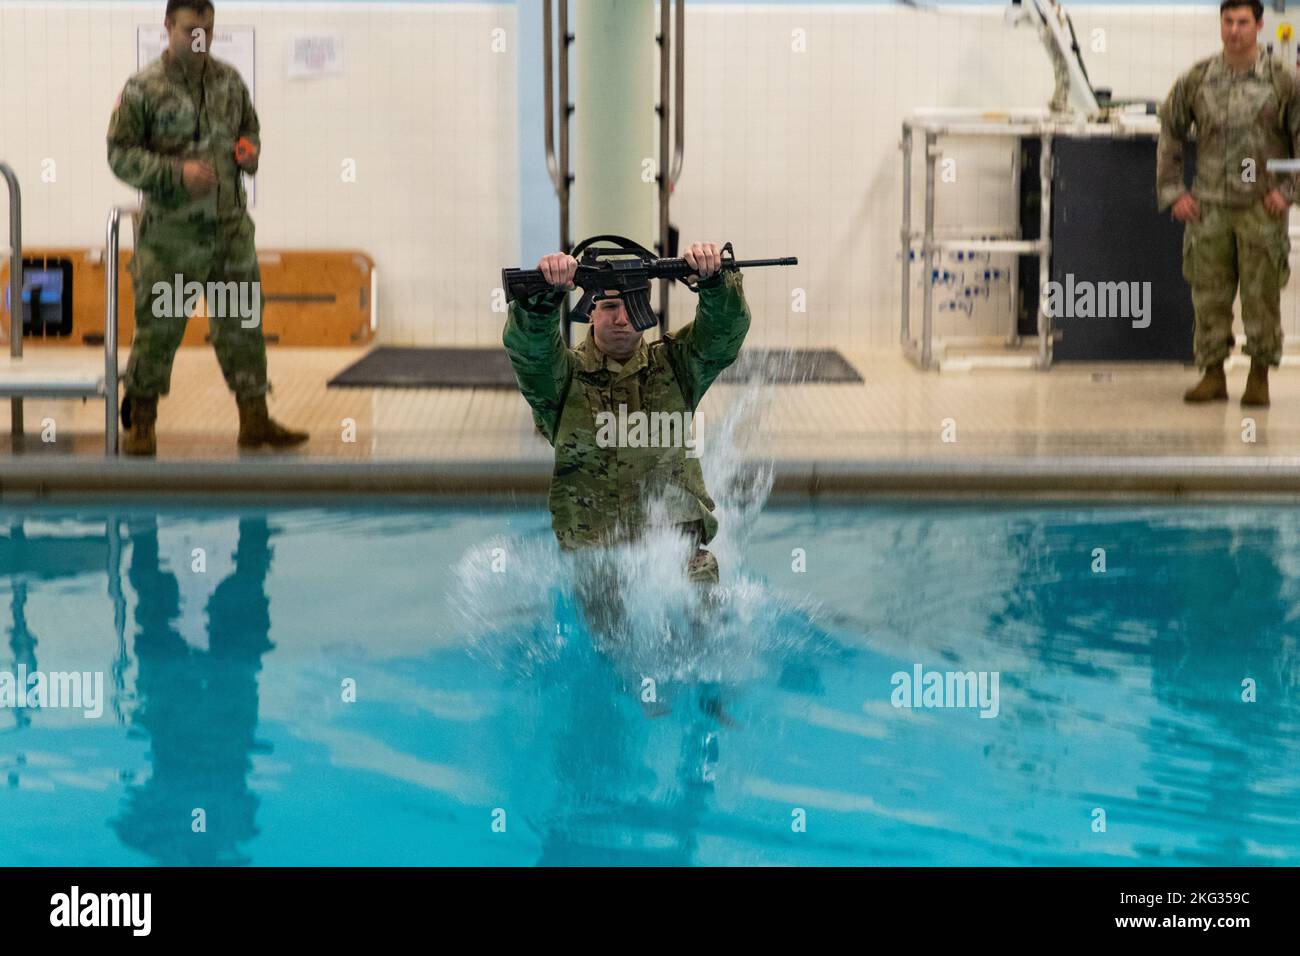 1st Lt. Austin Pinkerton from Bassett Army Medical Center, Fort Wainwright, steps off the diving board during the Combat Water Survival Test in the 2022 Medical Readiness Command, Pacific Best Medic Competition Wednesday, October 26th 2022 at Joint Base Lewis-McChord. Stock Photo